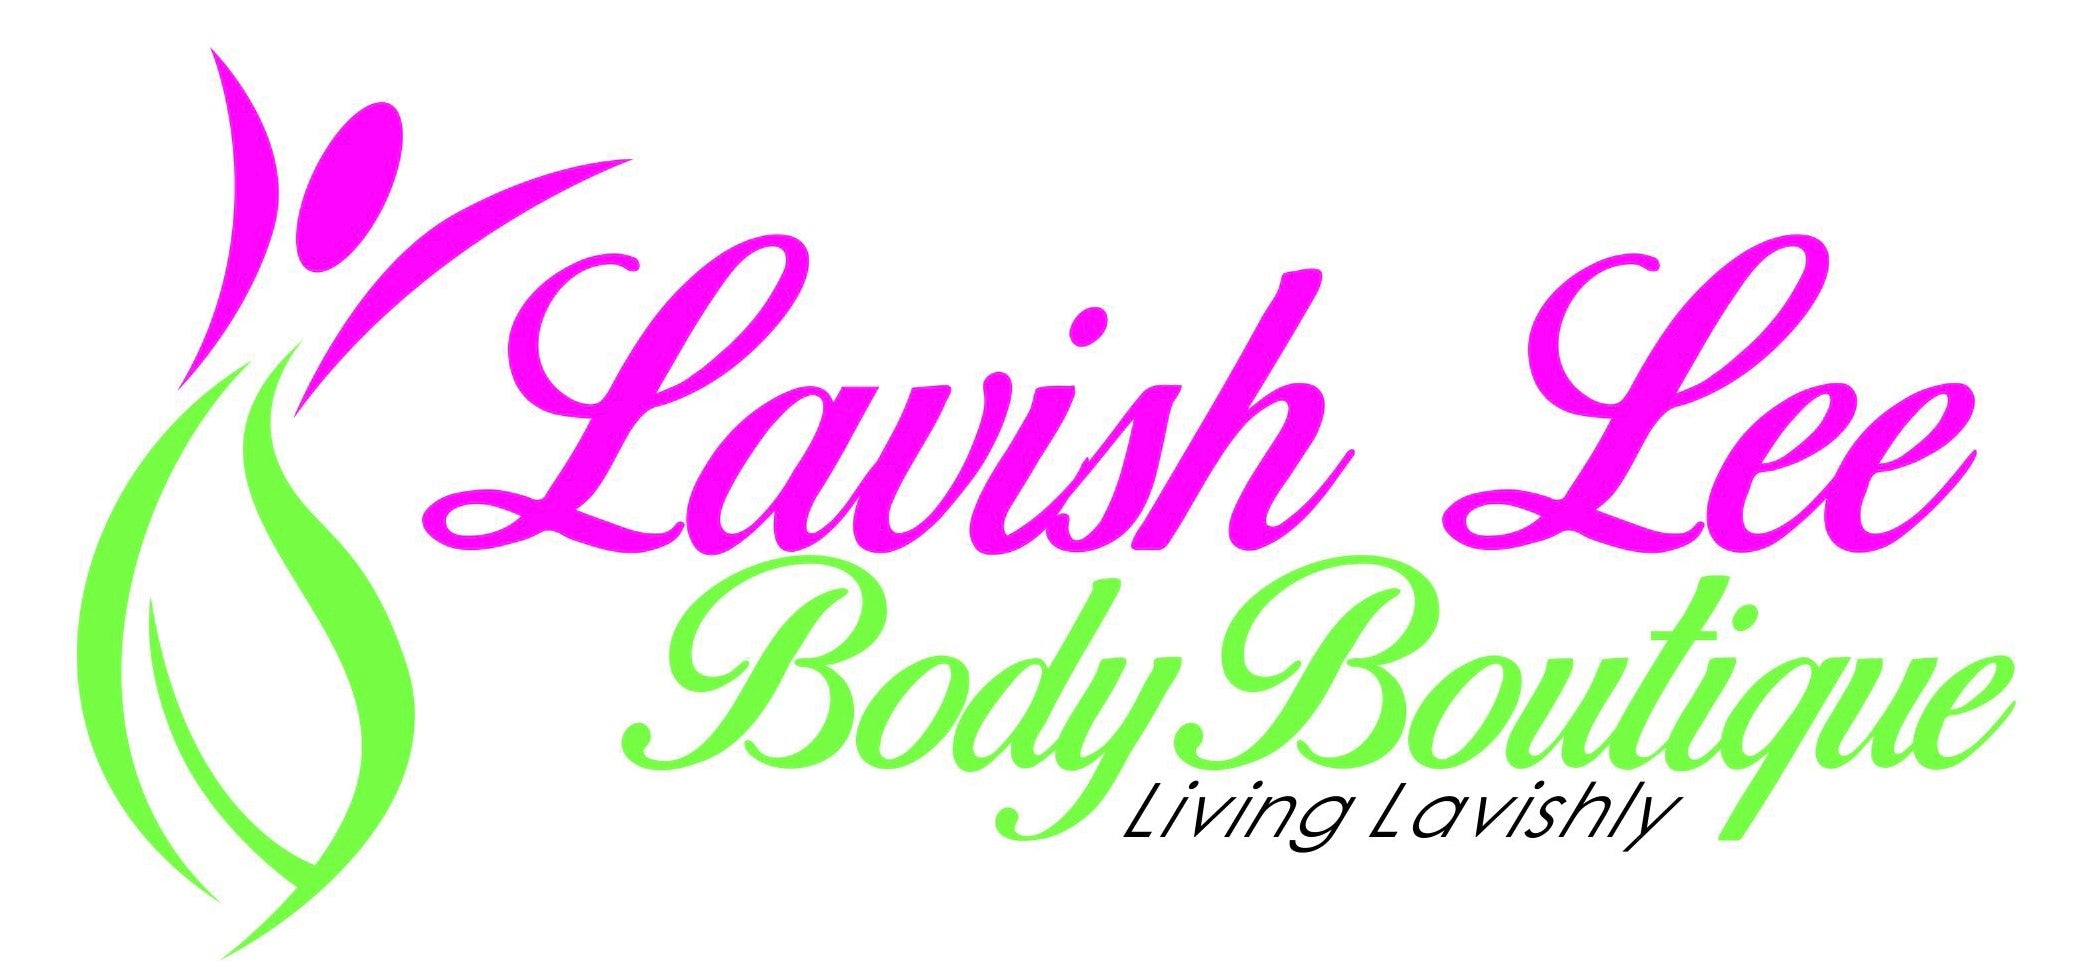 Handcrafted Natural self-care products – Lavish Lee Body Boutique LLC